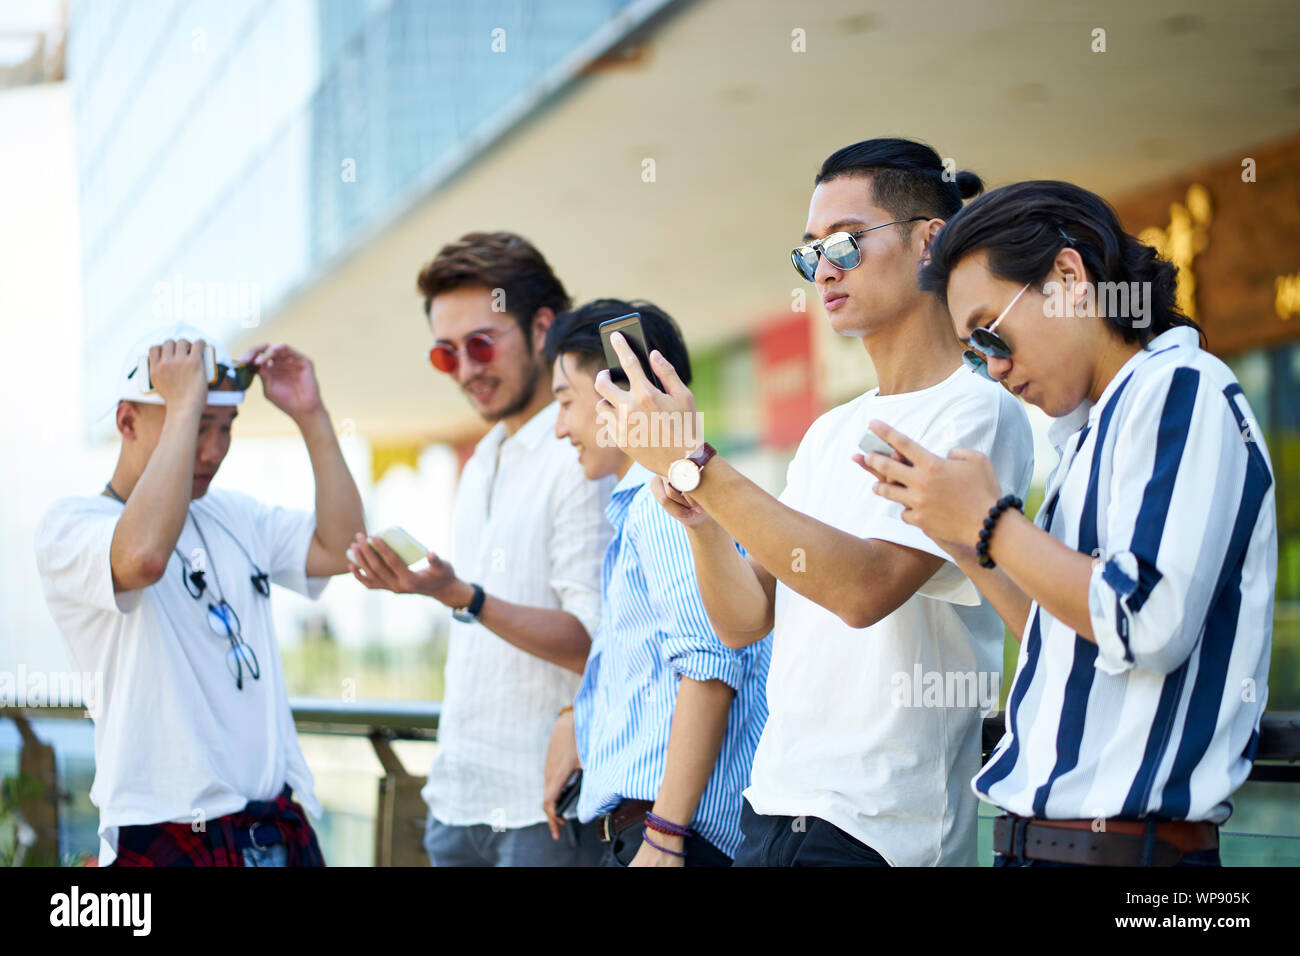 group of five young asian men playing with cellphones outdoors Stock Photo